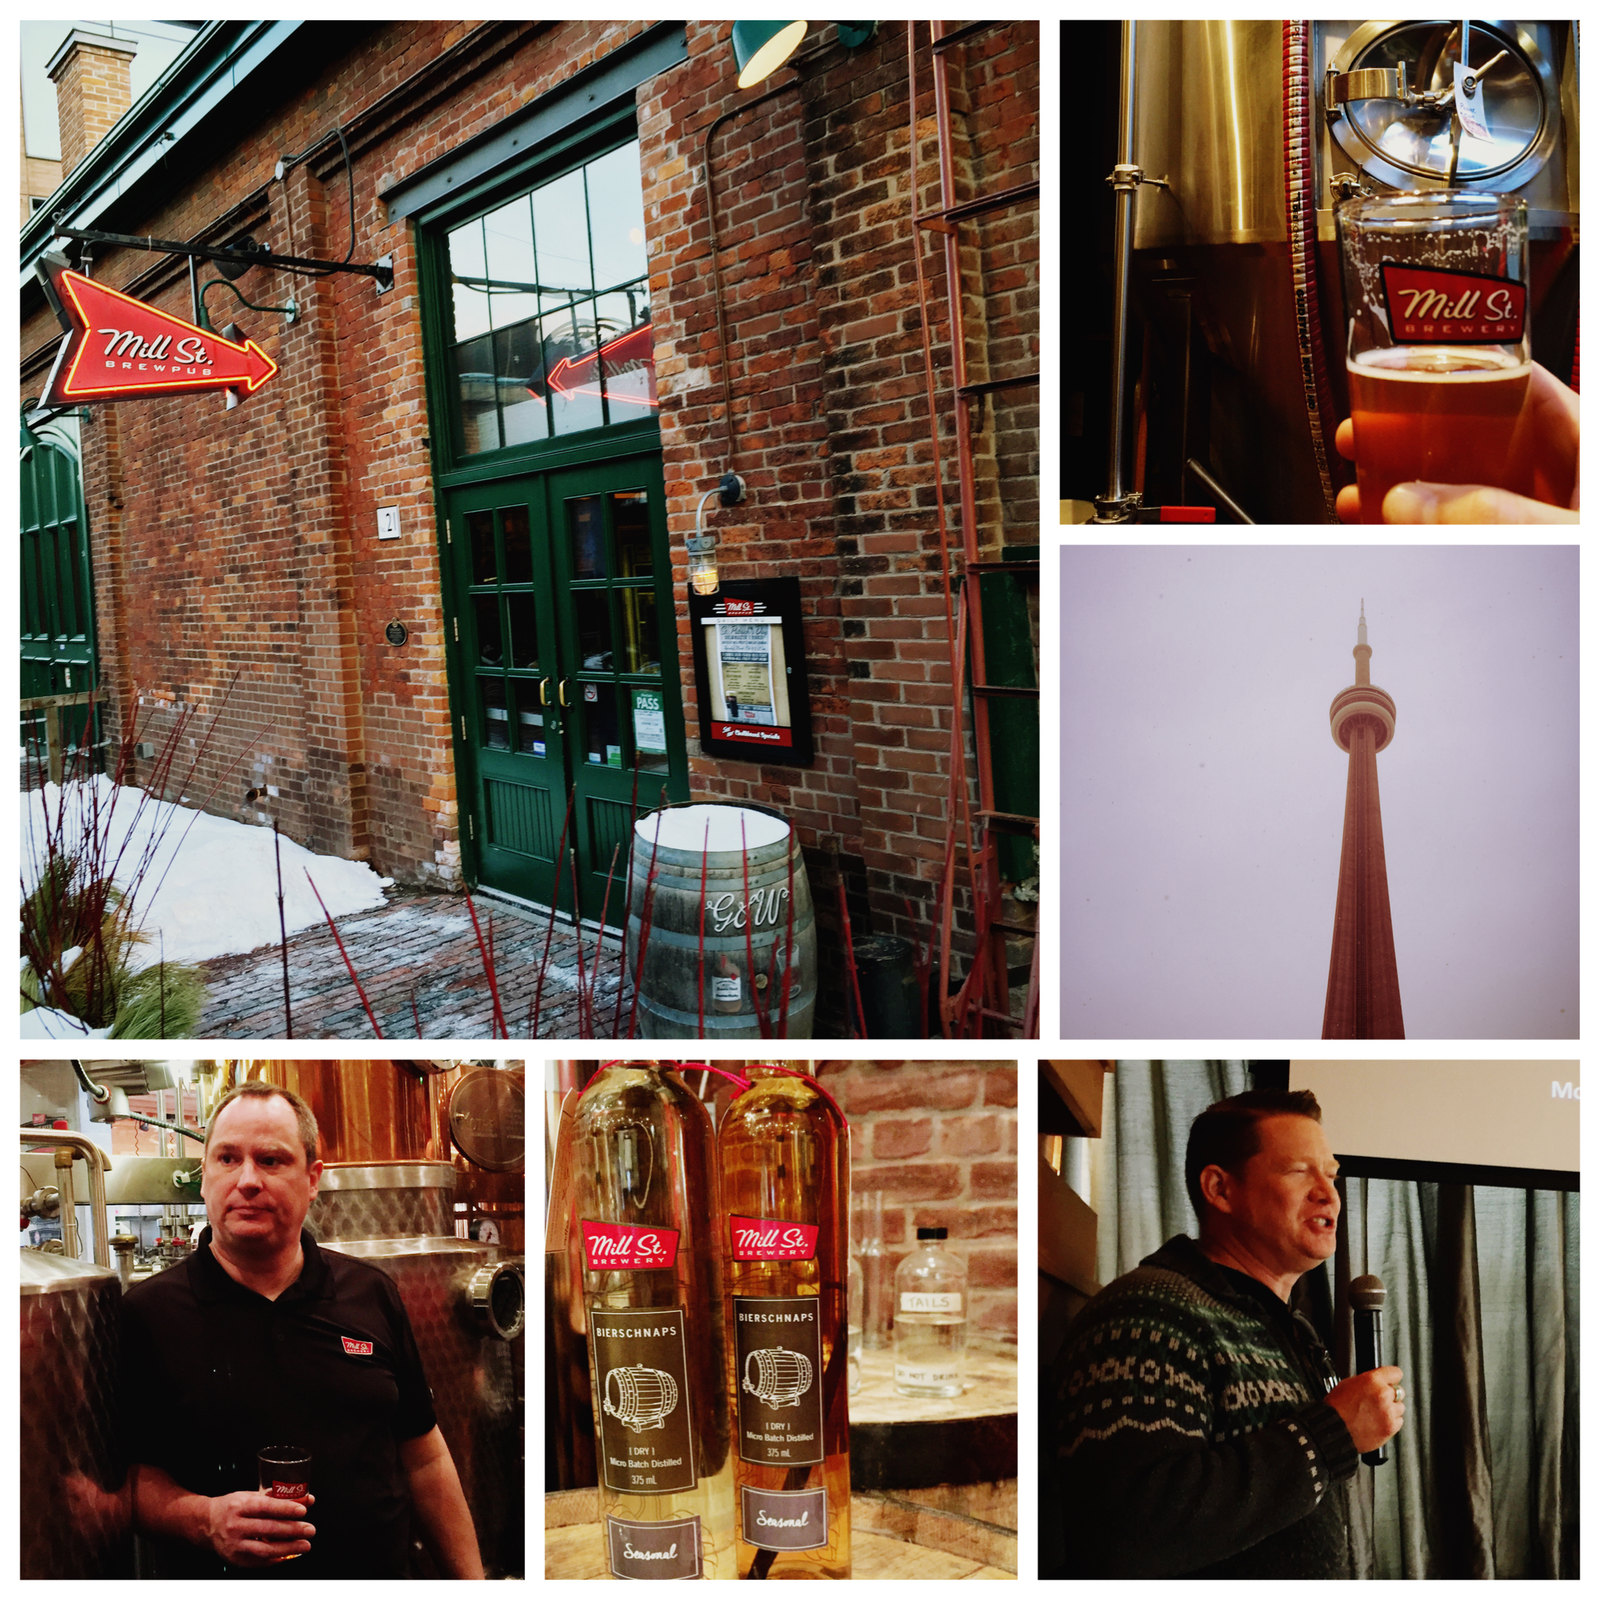 mill street brewery tours